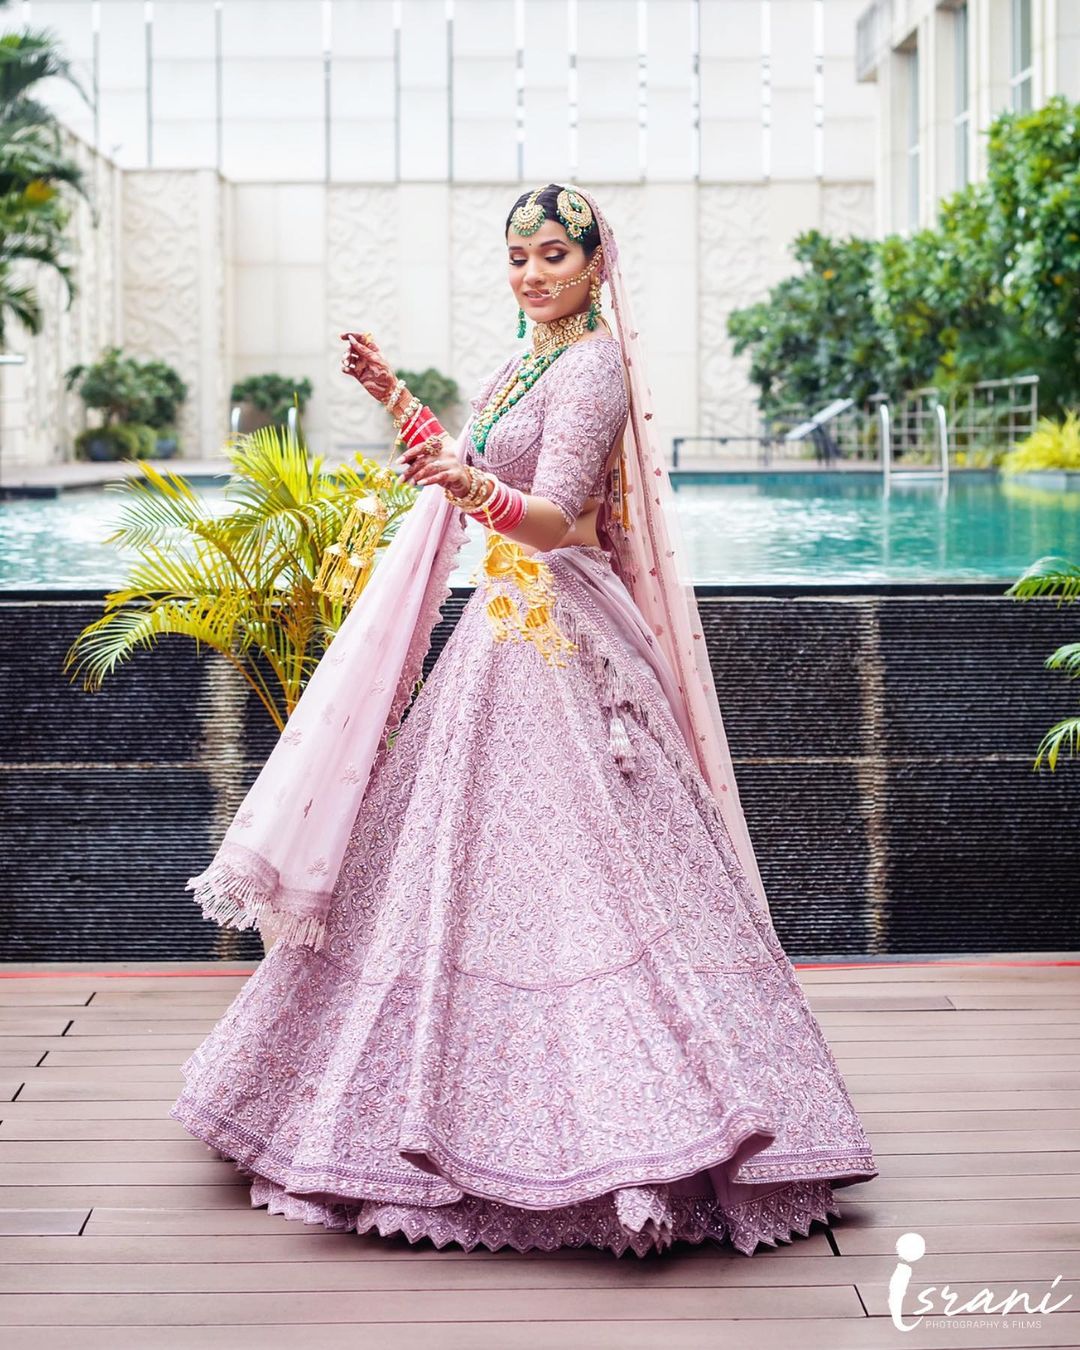 The Lavender Pink Kind Shades Of Bridal Pink Lehenga For Her Wedding Day